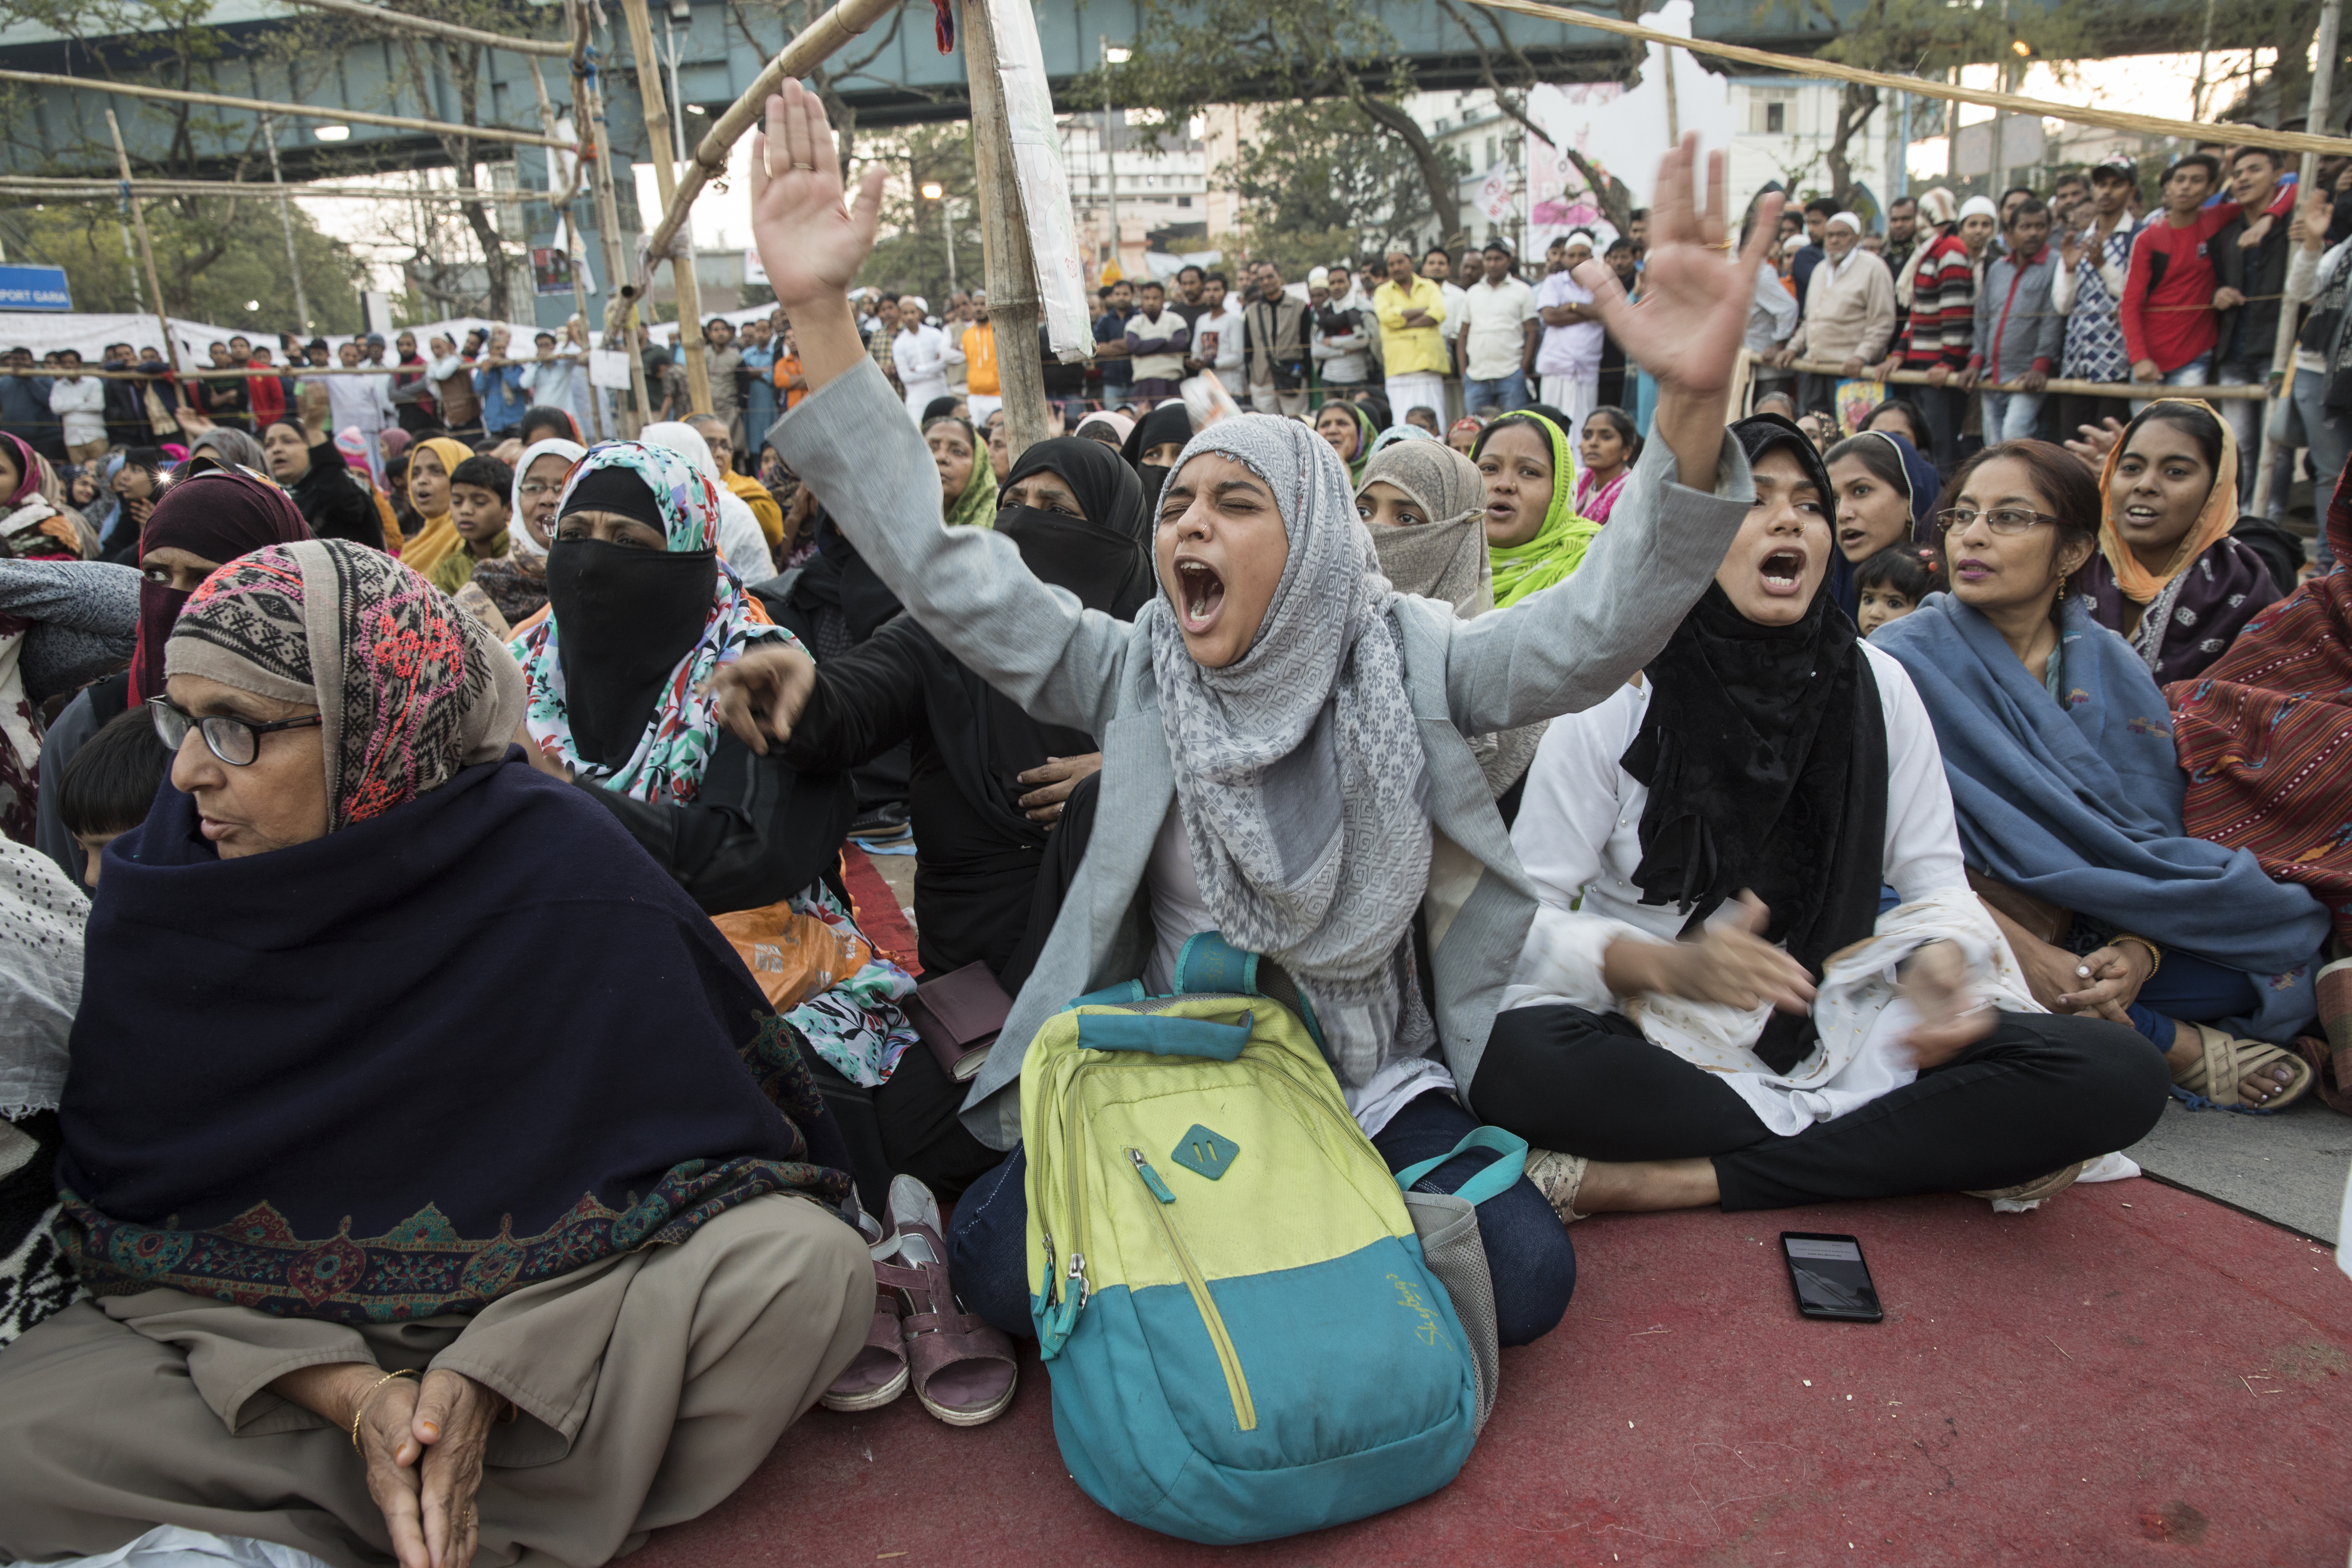 Muslim women staging a sit-in against the Indian government's plans of introducing a national register of citizens, Park Circus, Kolkata. January 2020.